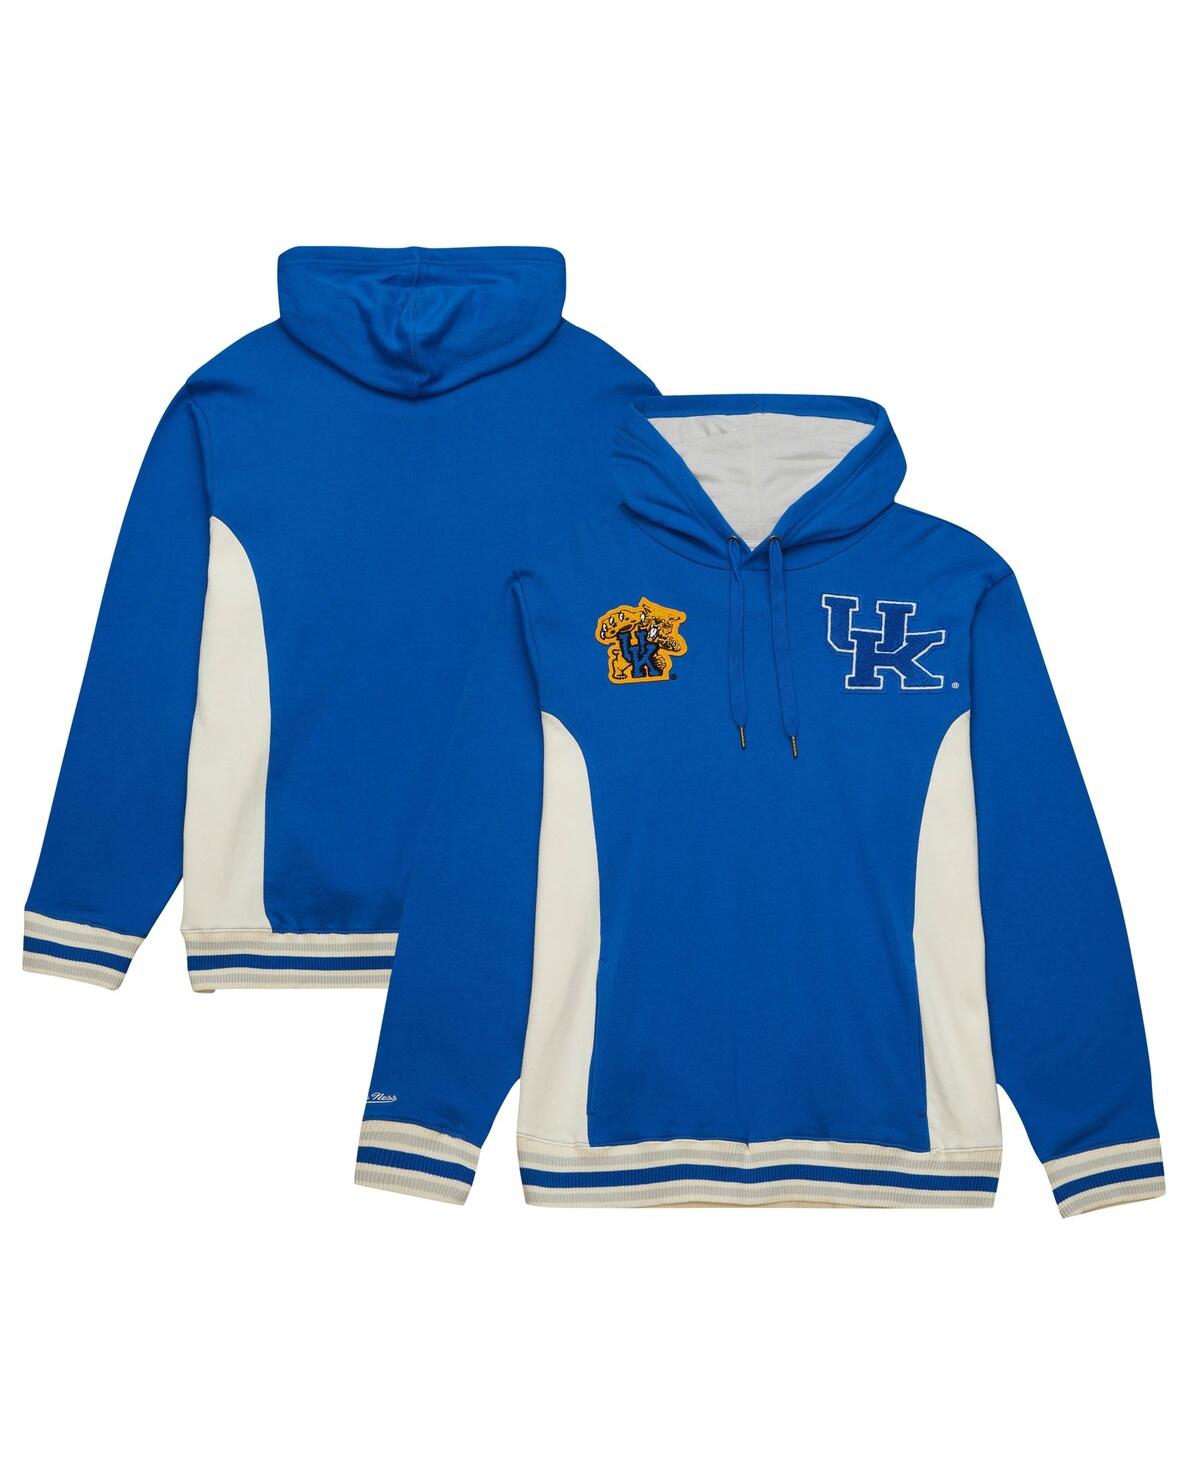 Men's Mitchell & Ness Royal Kentucky Wildcats Team Legacy French Terry Pullover Hoodie - Royal